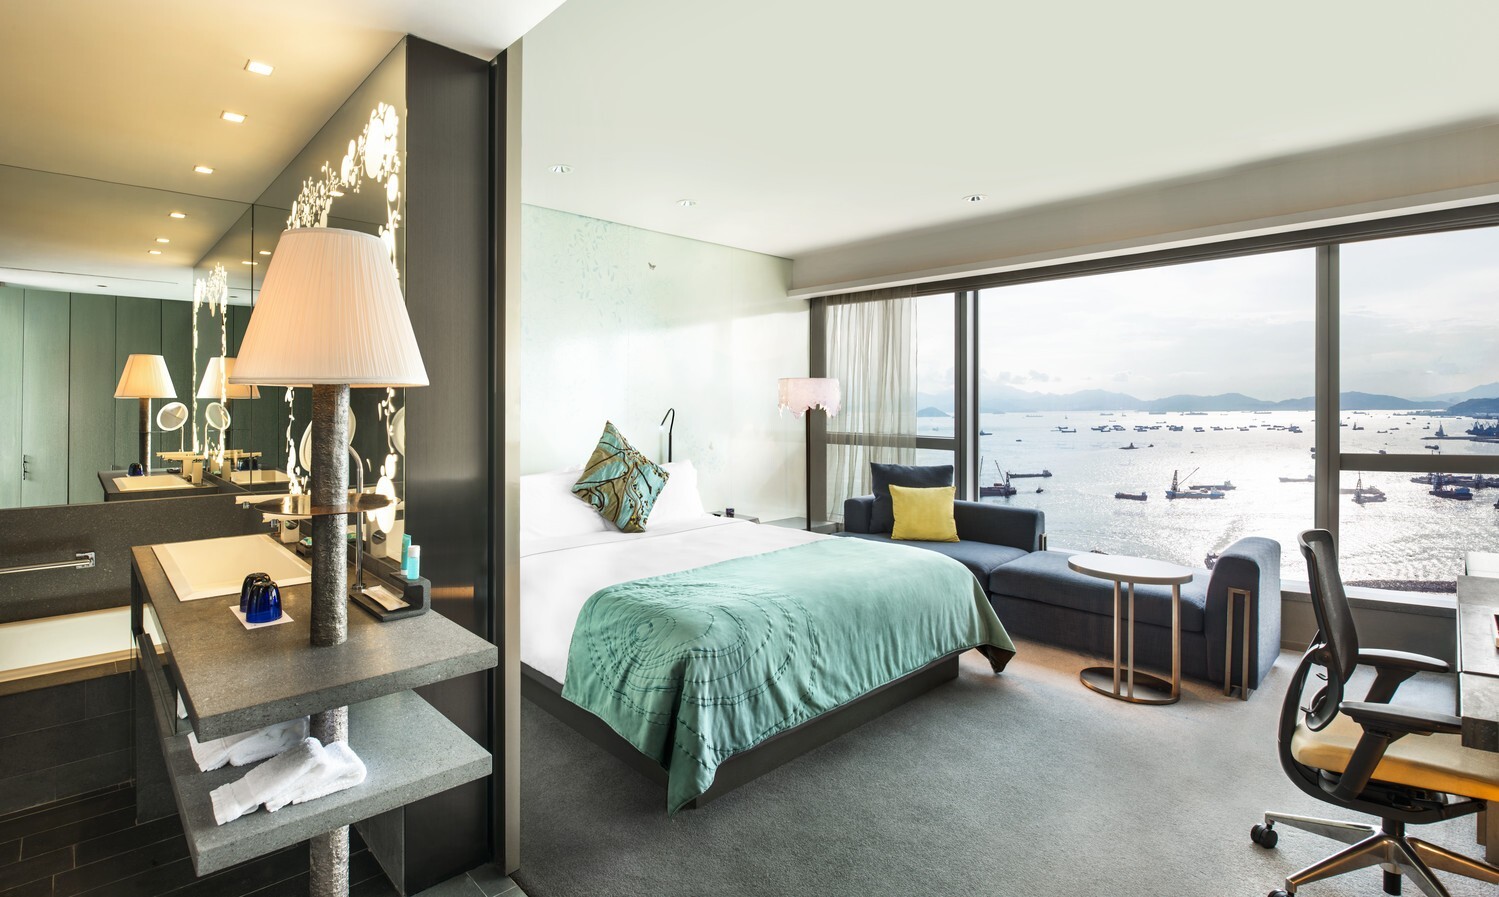 W Hong Kong’s lavish Amp up your stay packages includes a room upgrade to Fabulous among its numerous features. Photo: W Hong Kong